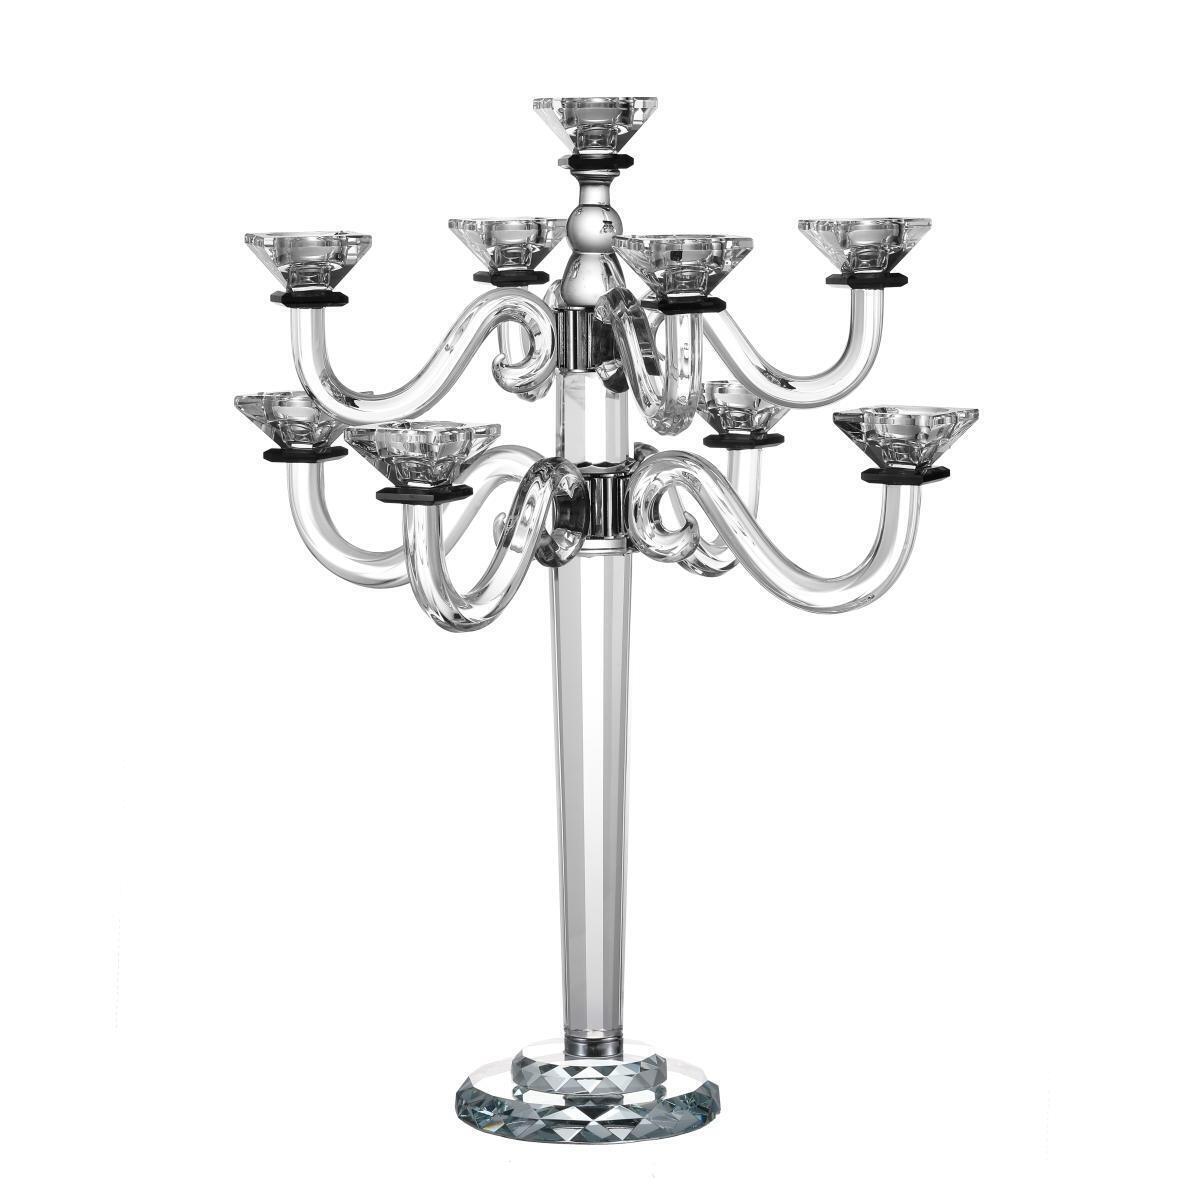 A&M Judaica & Gifts 182950 22 in. Candelabra 9 Branch with Rim, Crystal & Black